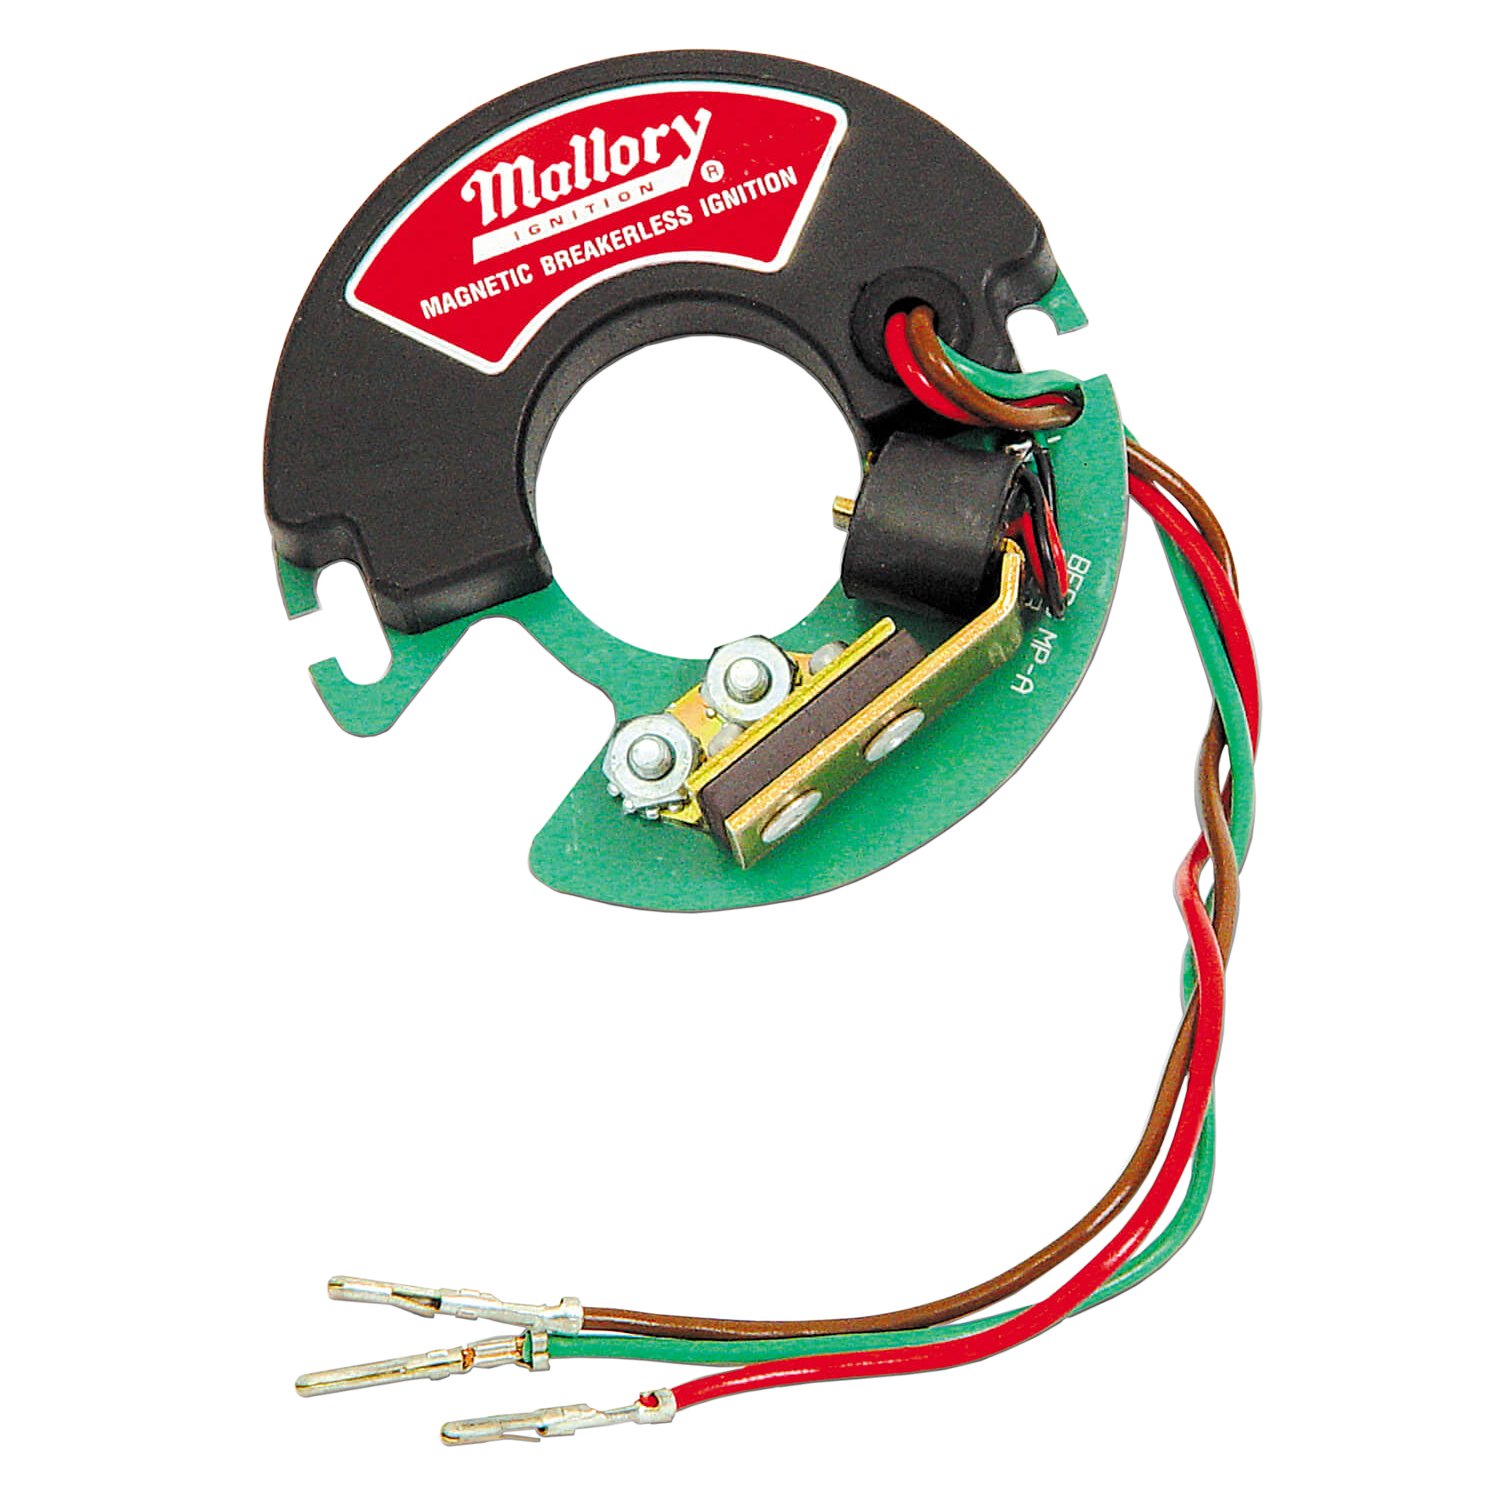 Magnetic Breakerless Module For Mallory Series 42, 50,